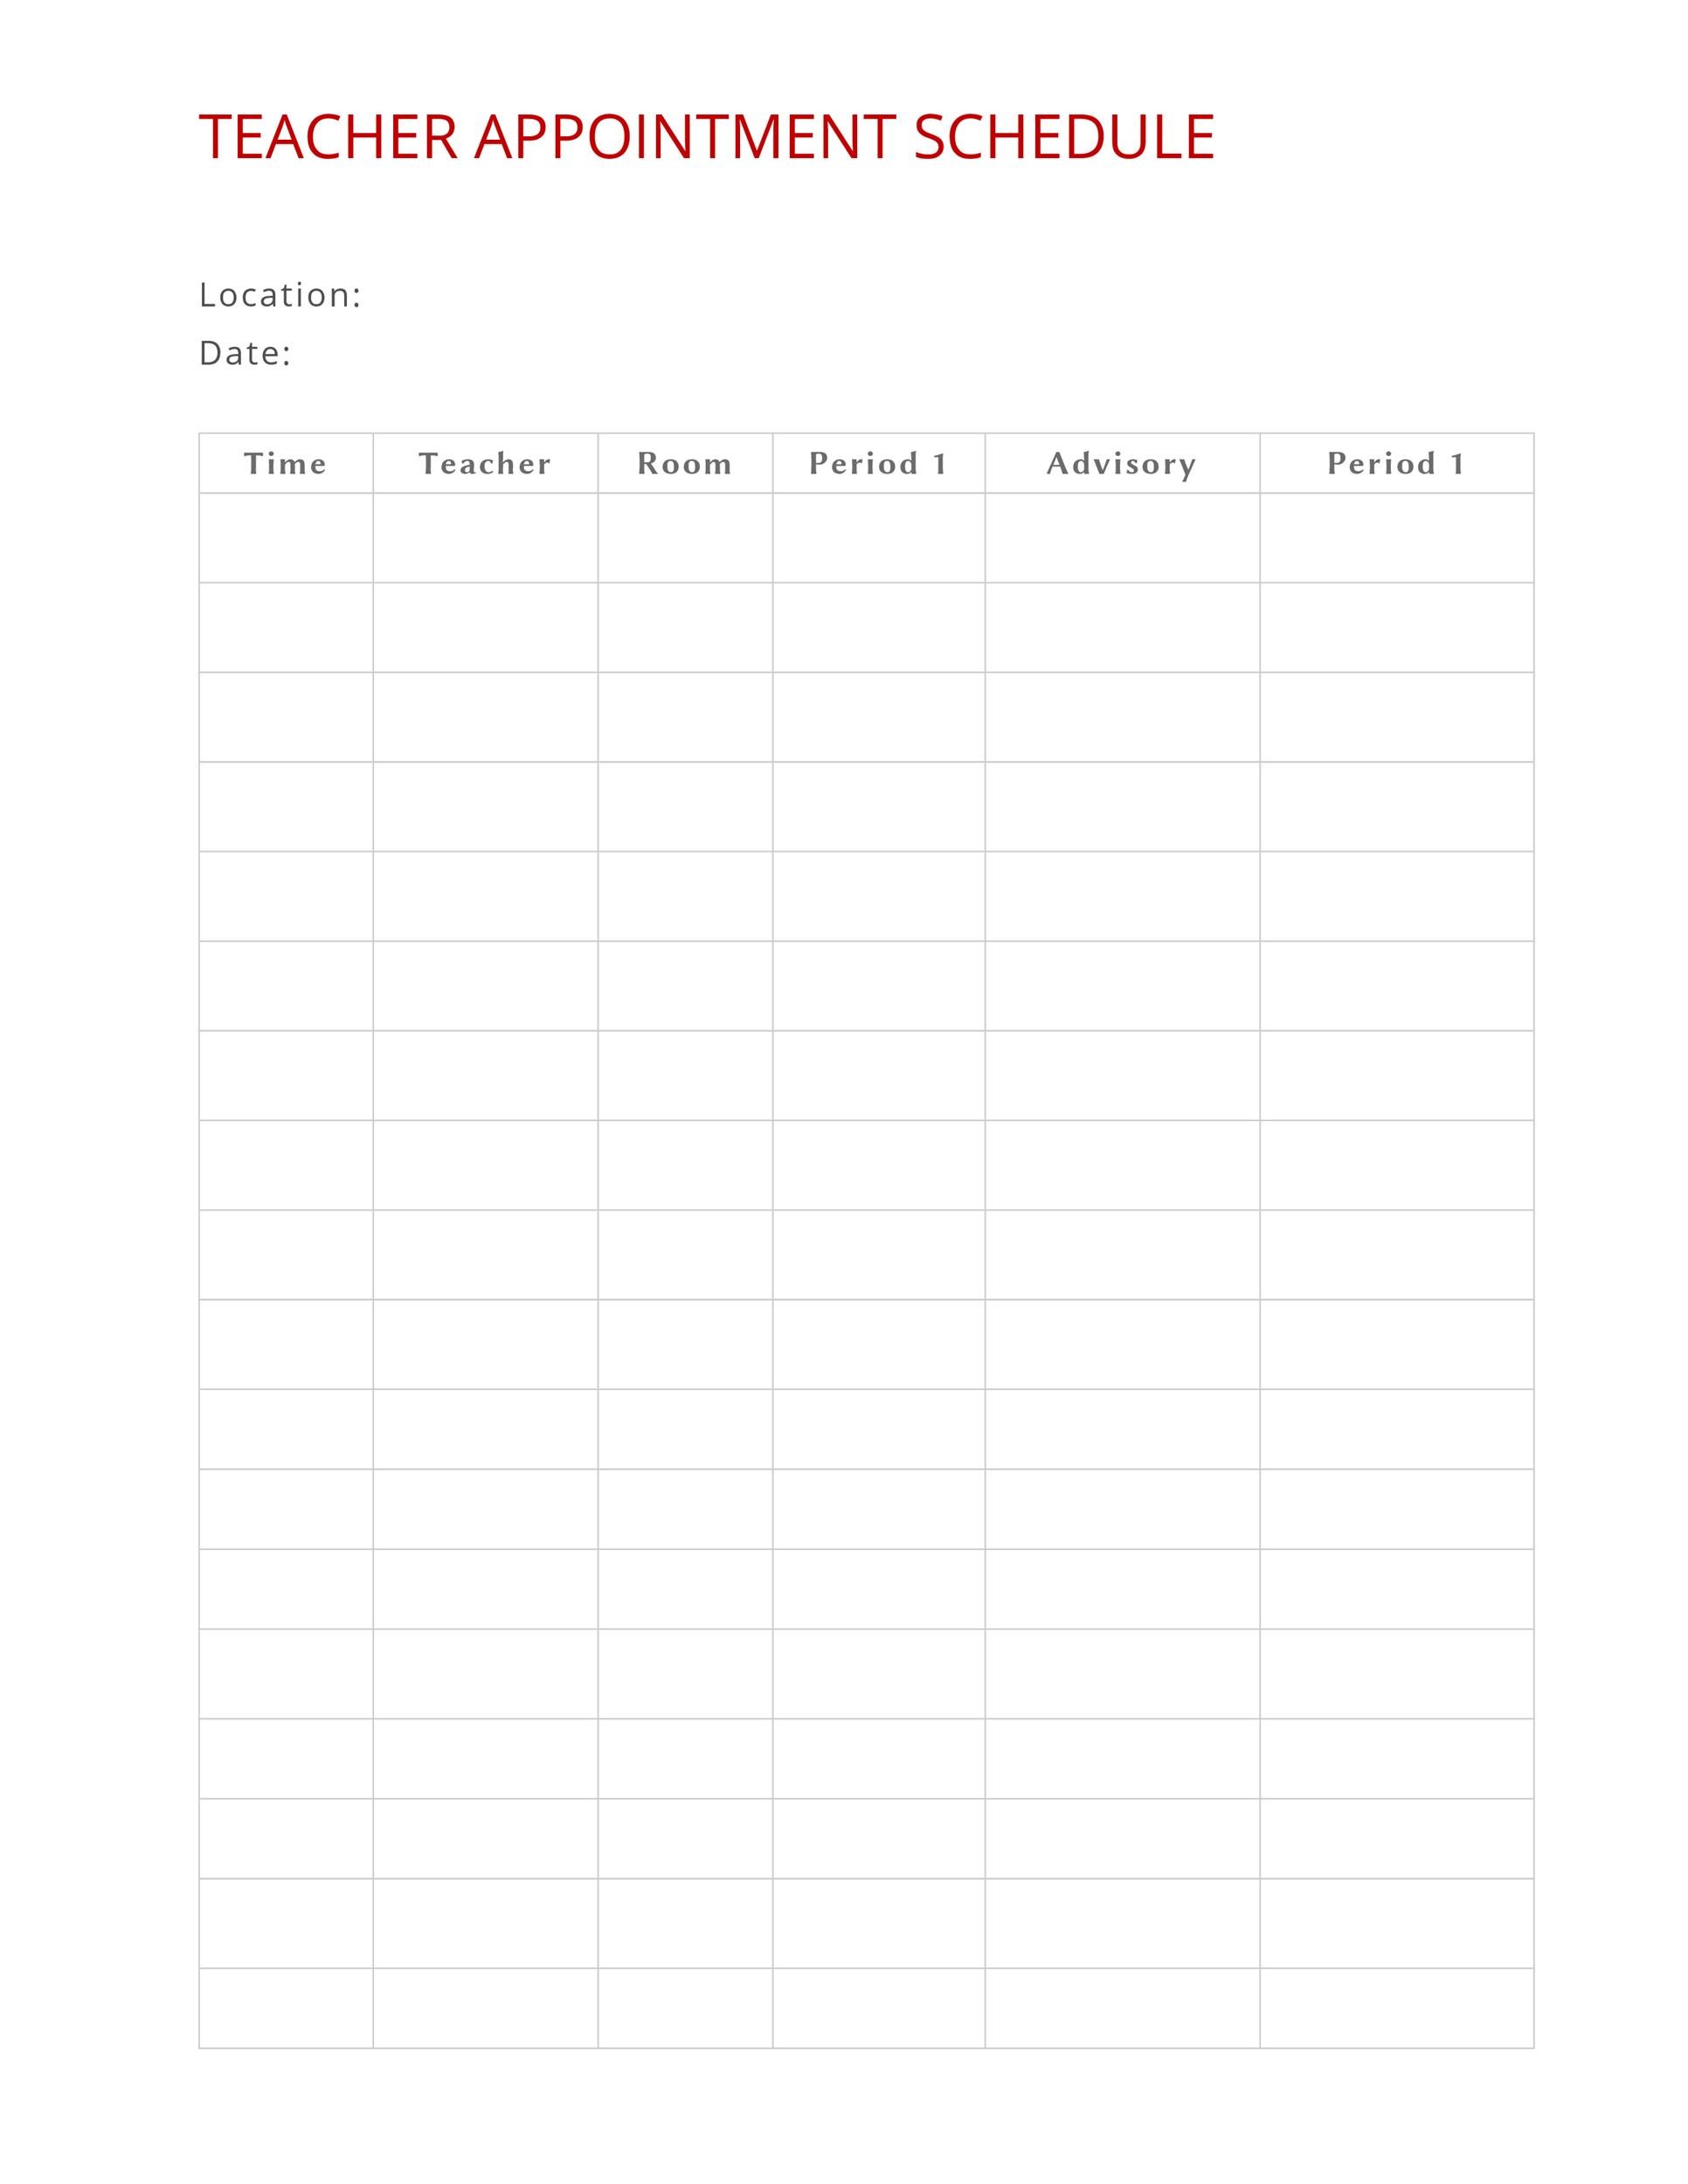 Free appointment schedule template 39